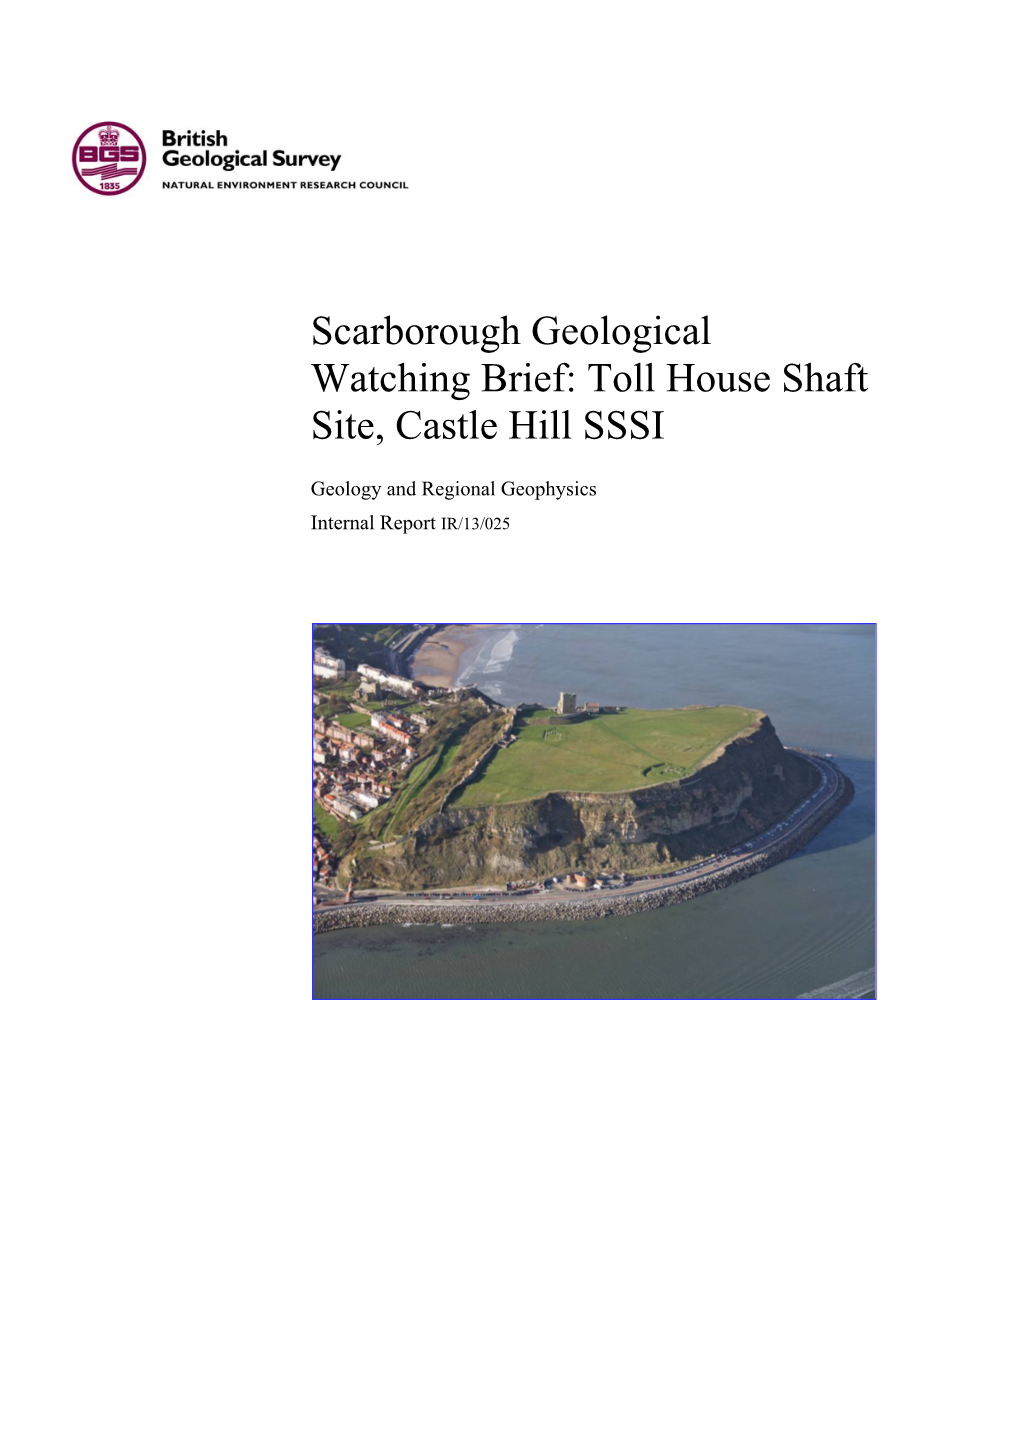 Scarborough Geological Watching Brief: Toll House Shaft Site, Castle Hill SSSI